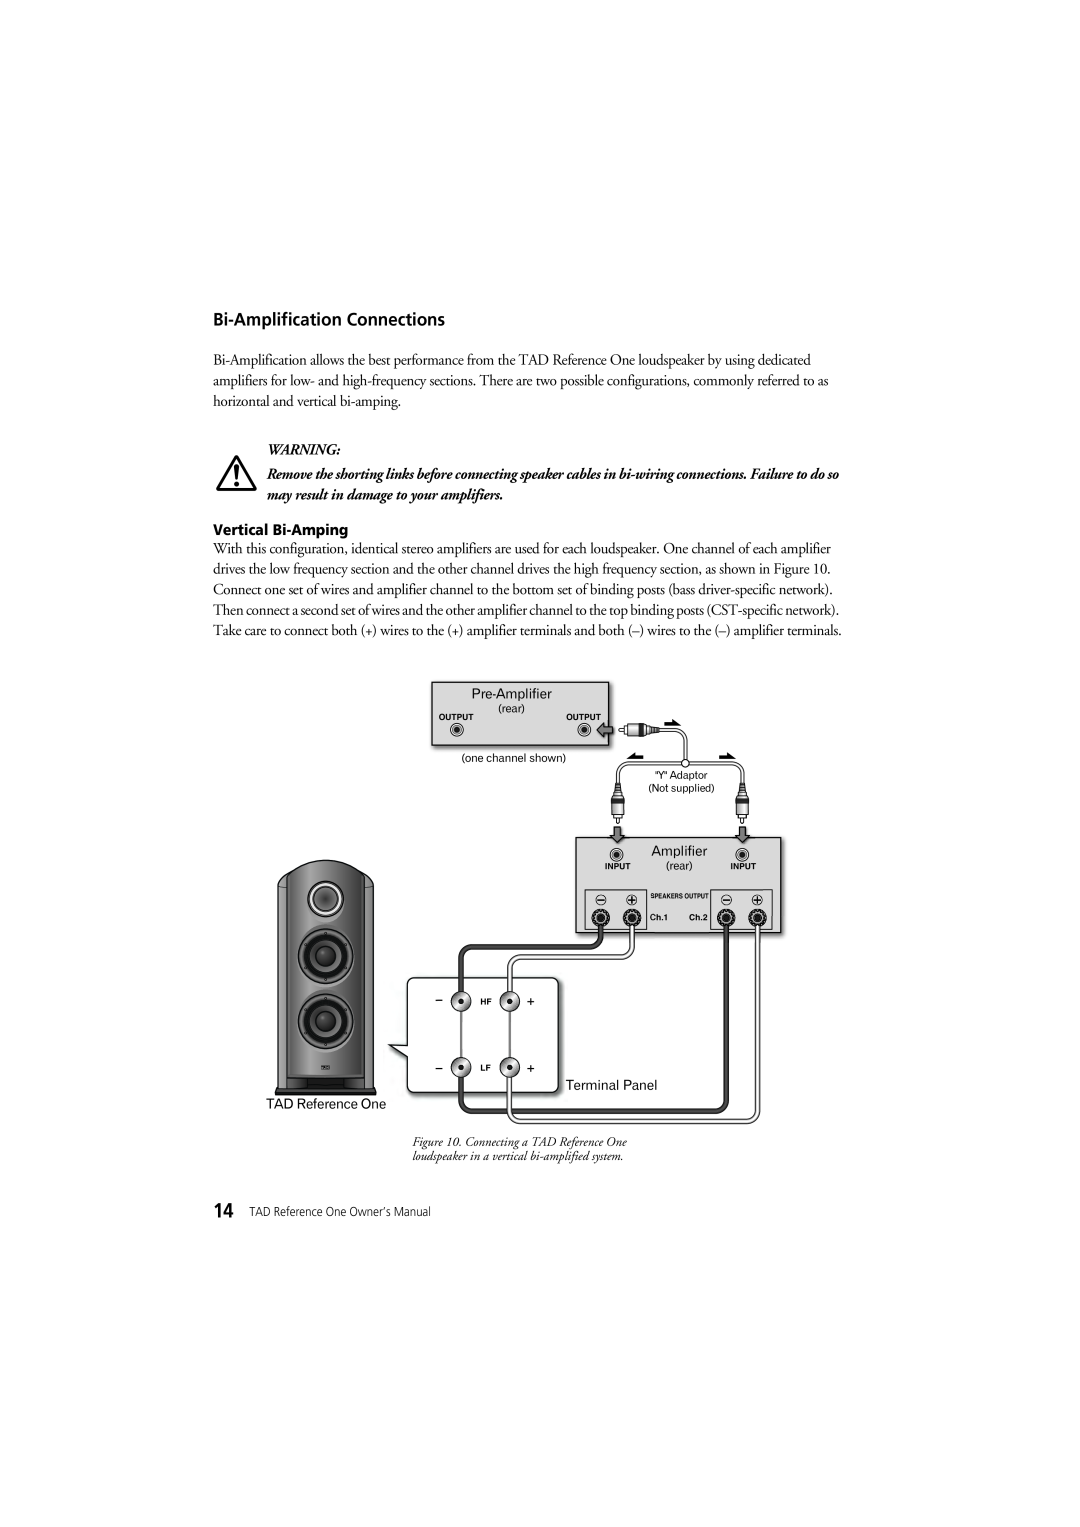 Pioneer TAD-R1 Bi-AmplificationConnections, Vertical Bi-Amping, Pre-Amplifier, Terminal Panel TAD Reference One 